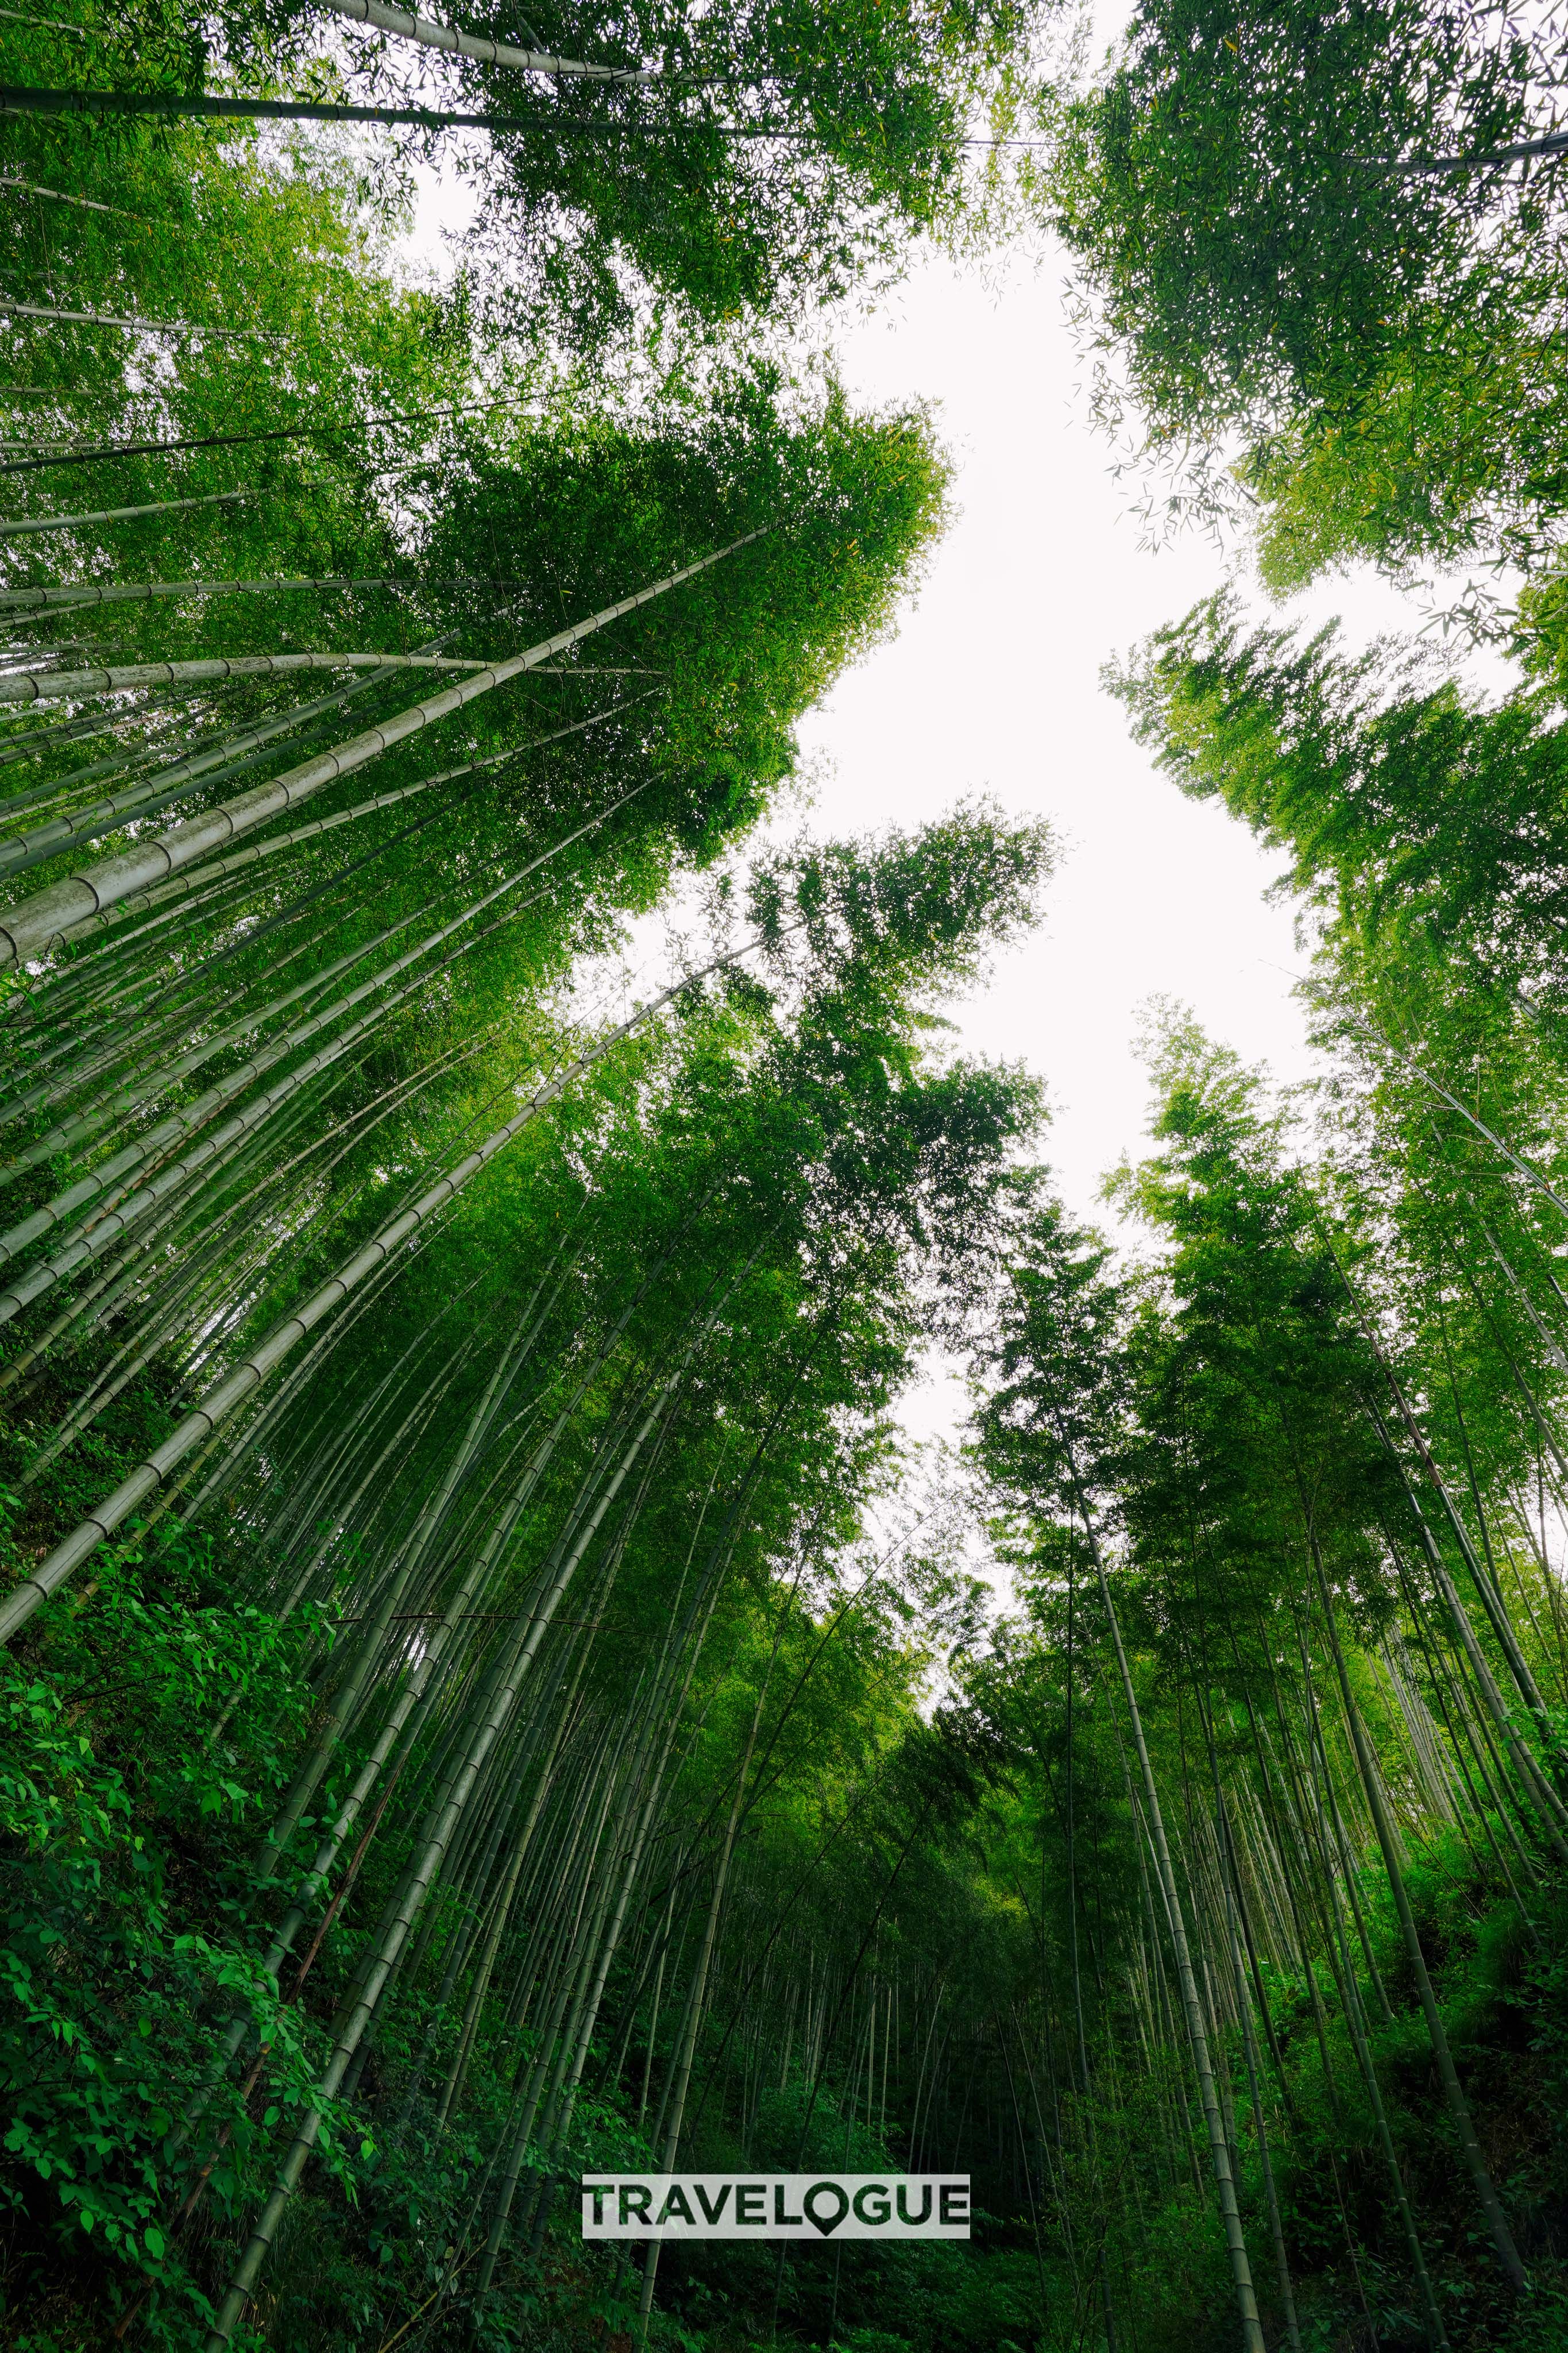 An undated photo shows a view of the Mukeng Bamboo Forest located in Huangshan, Anhui Province. /CGTN